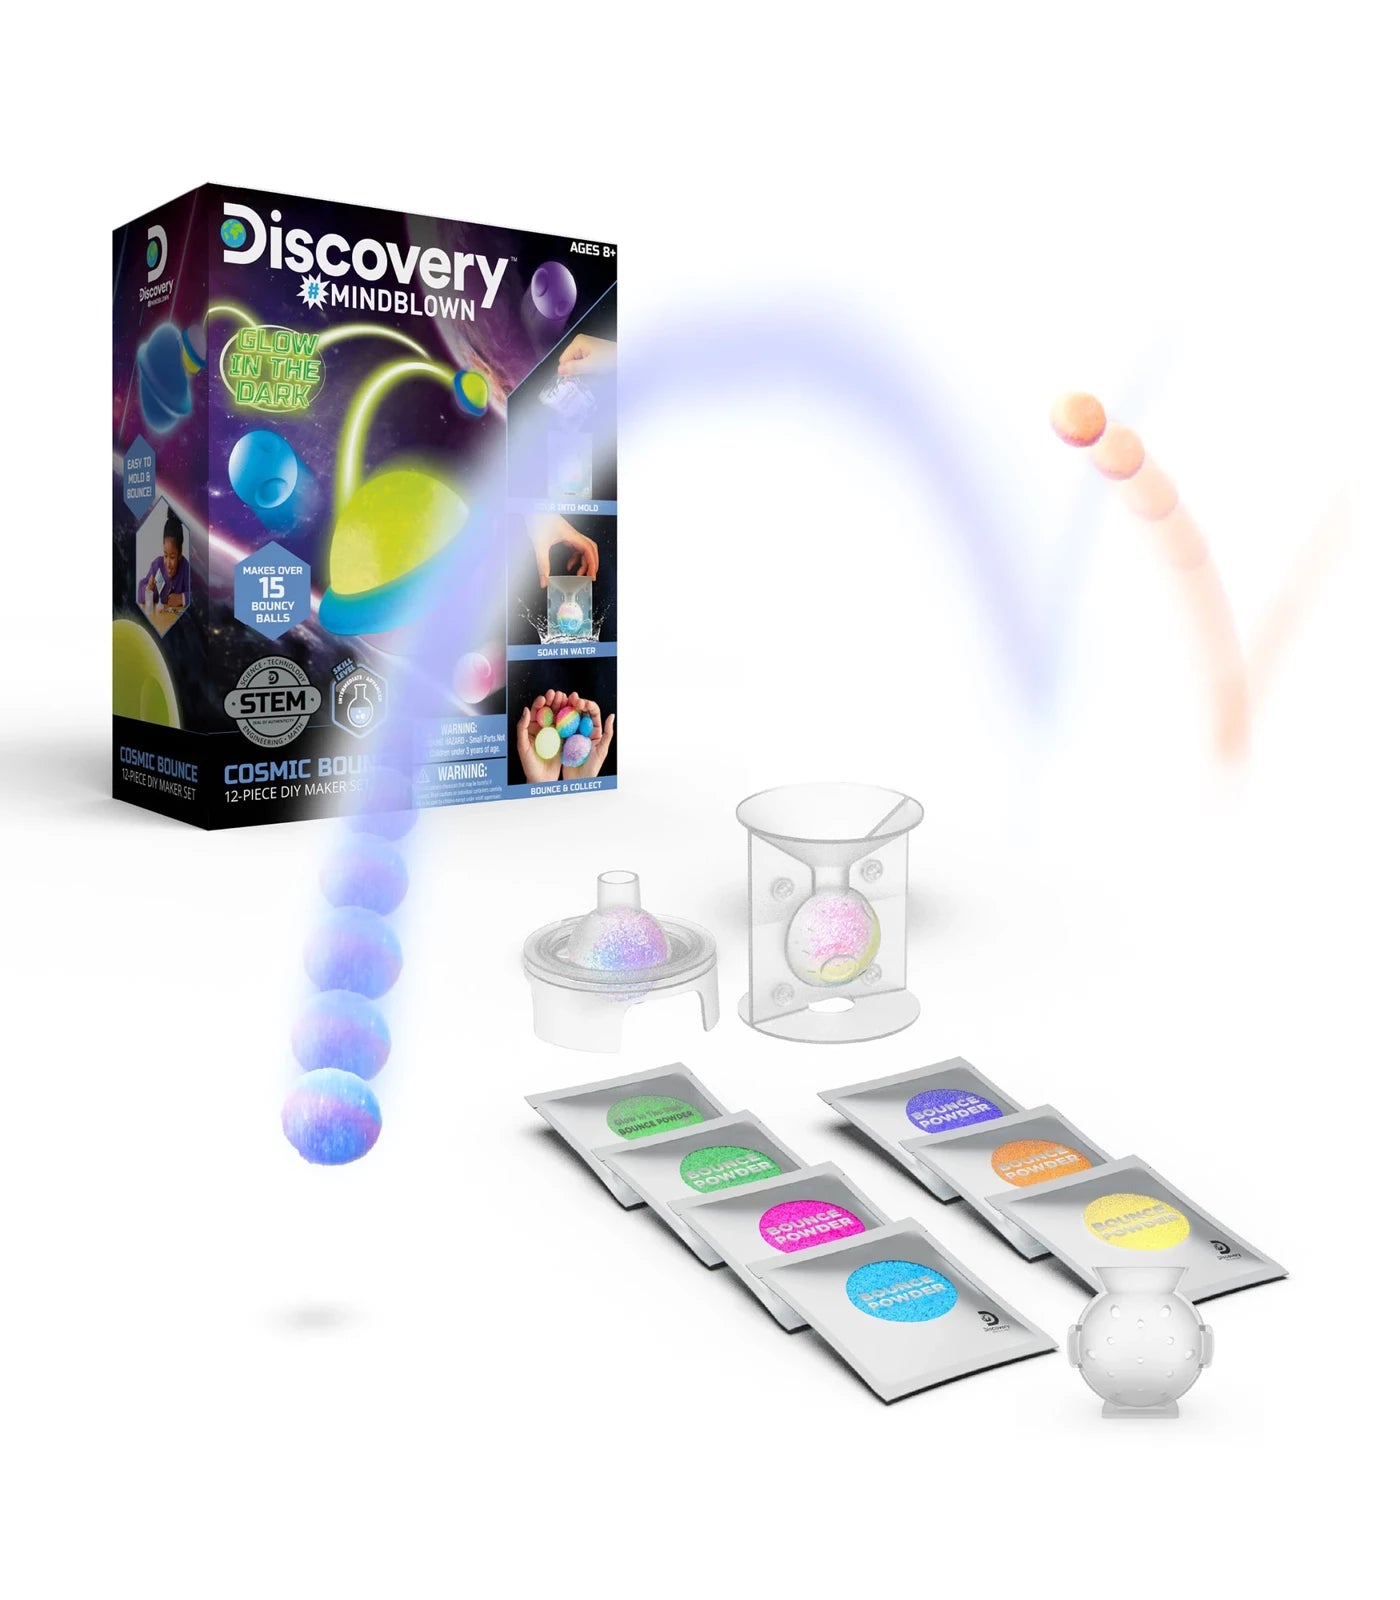 Discovery Mindblown Cosmic Bounce